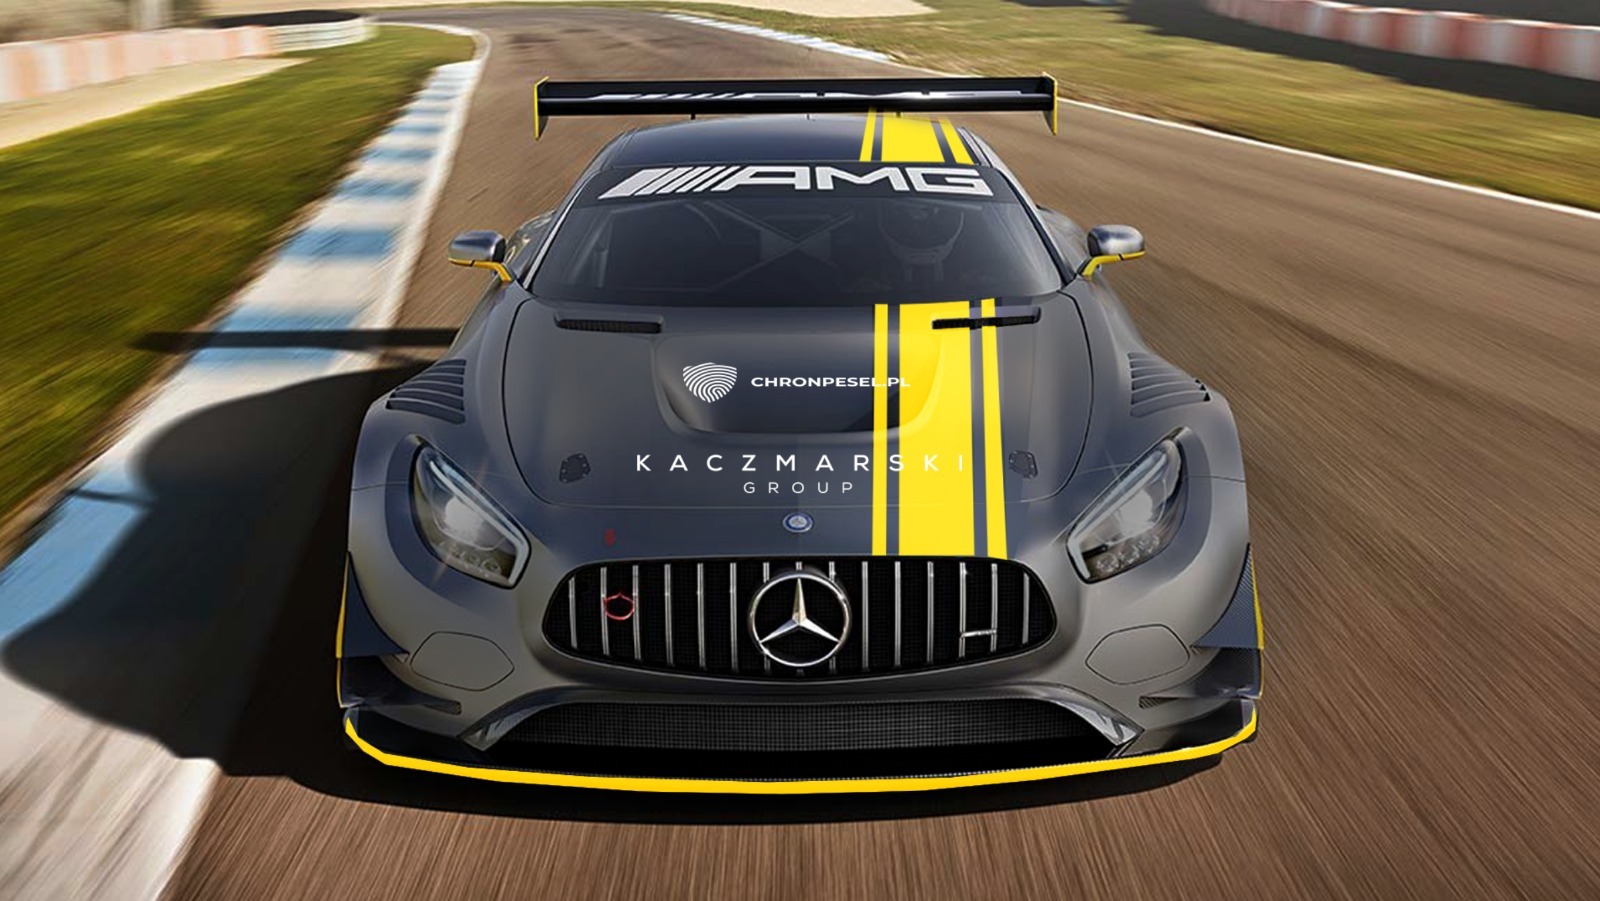 PTT Racing will field cars in the GT3 and GTC categories